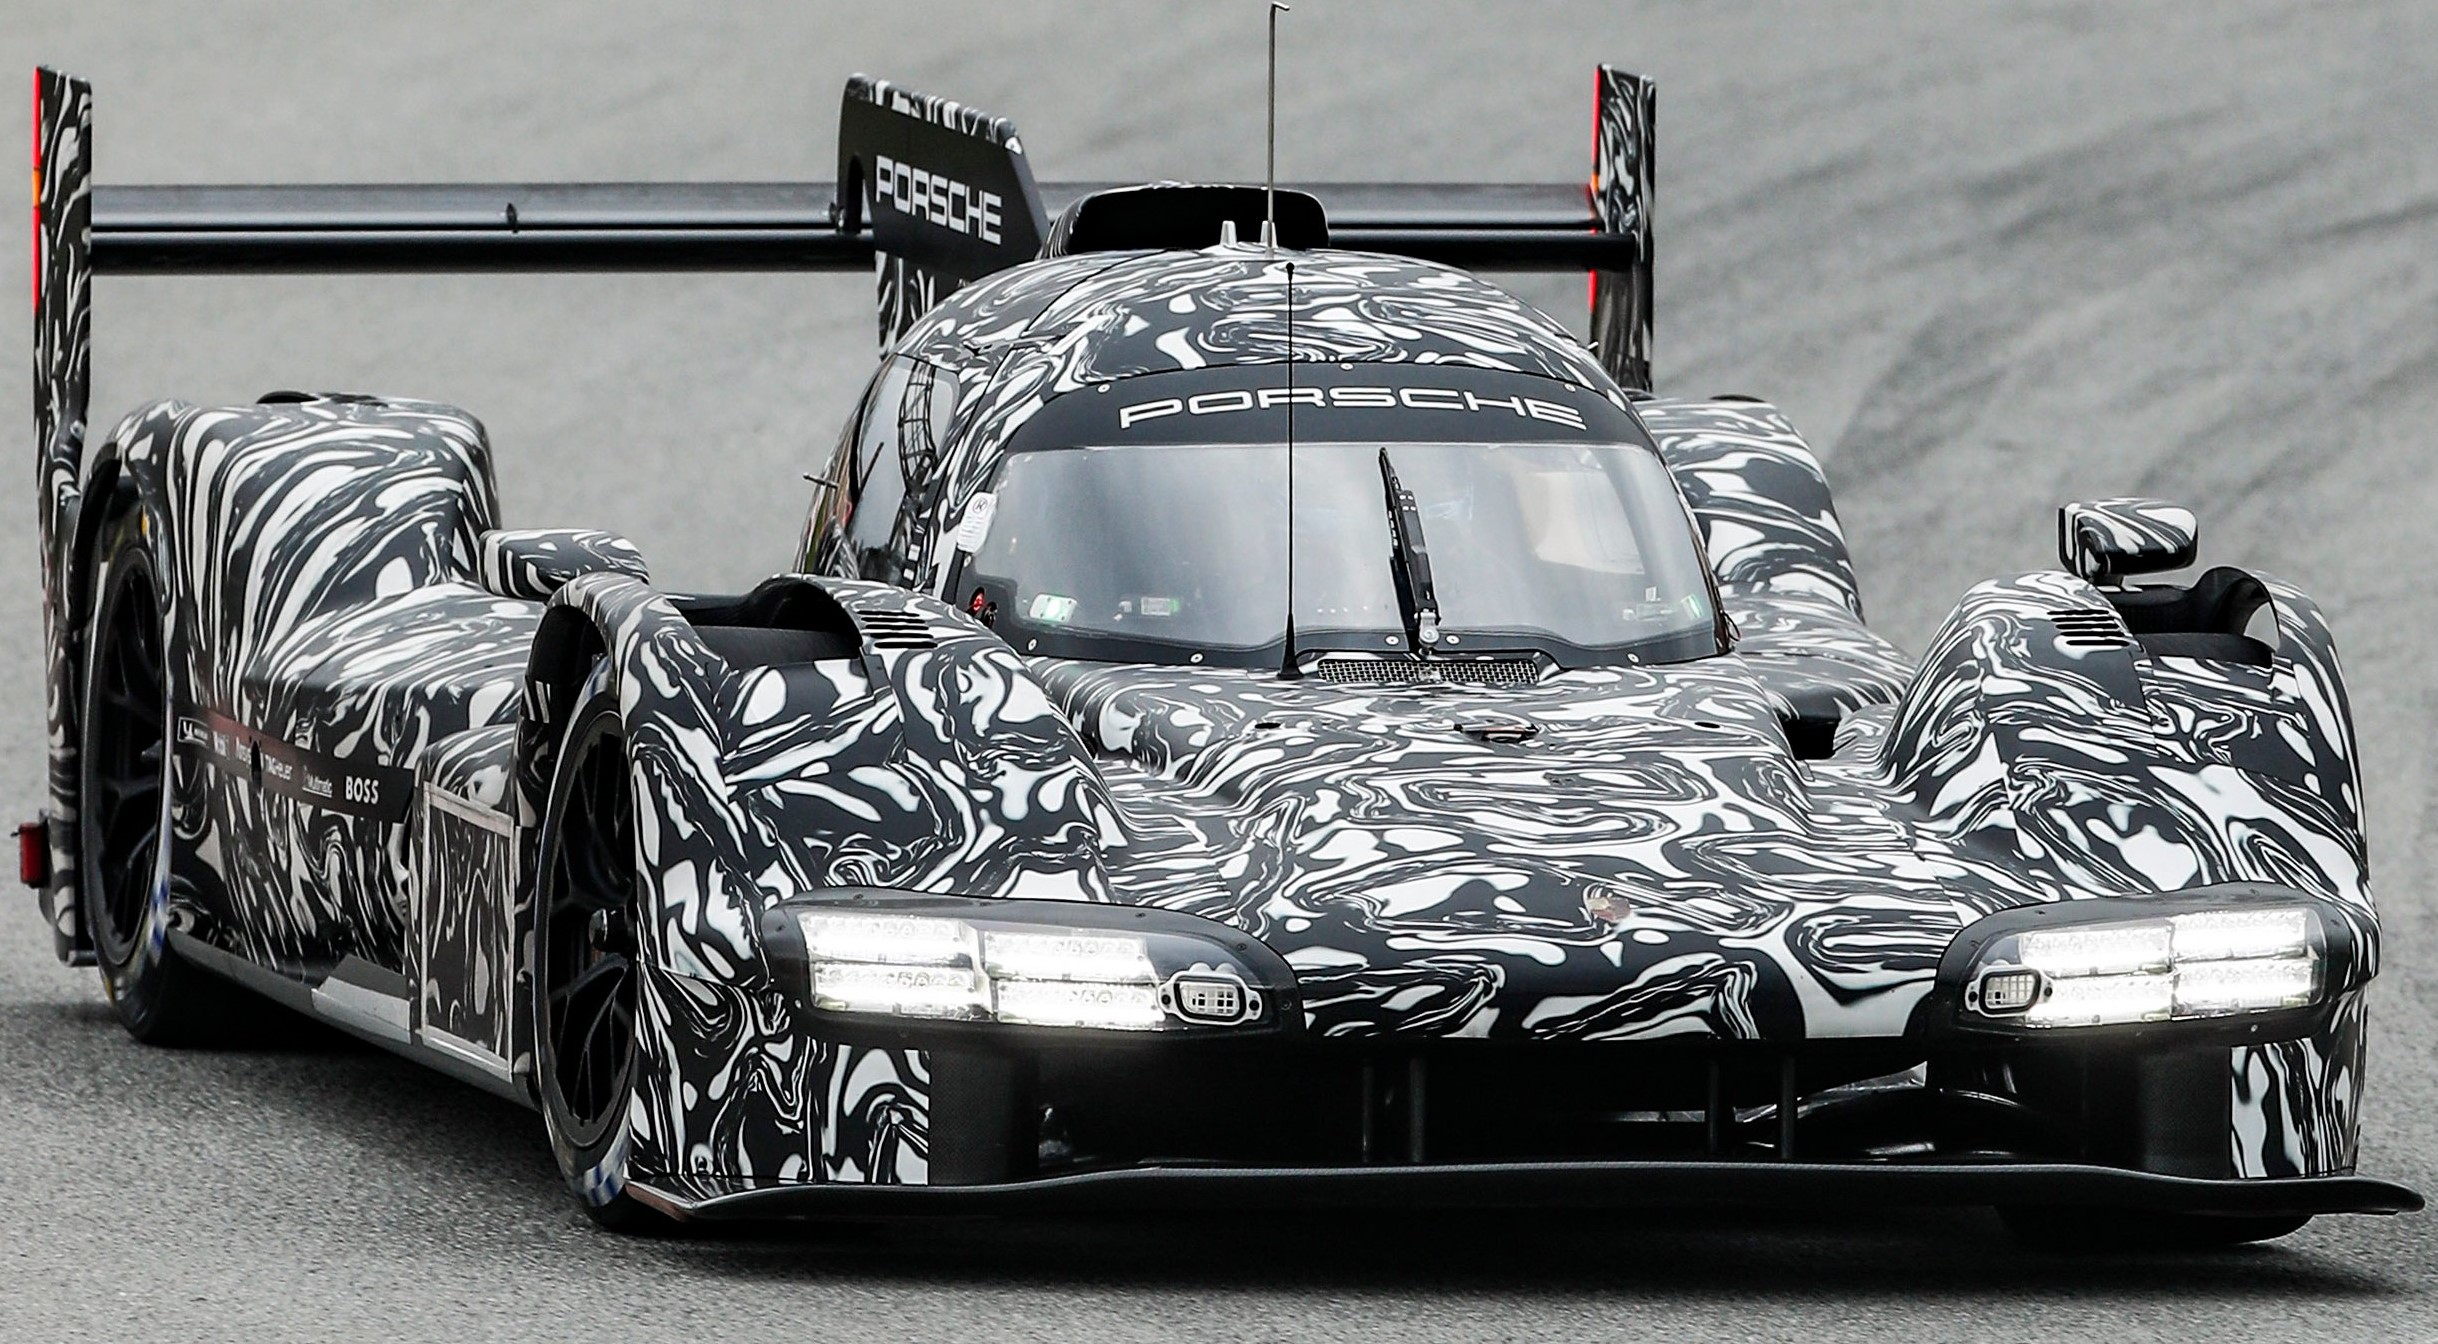 Porsche LMDh completes the first test in Barcelona